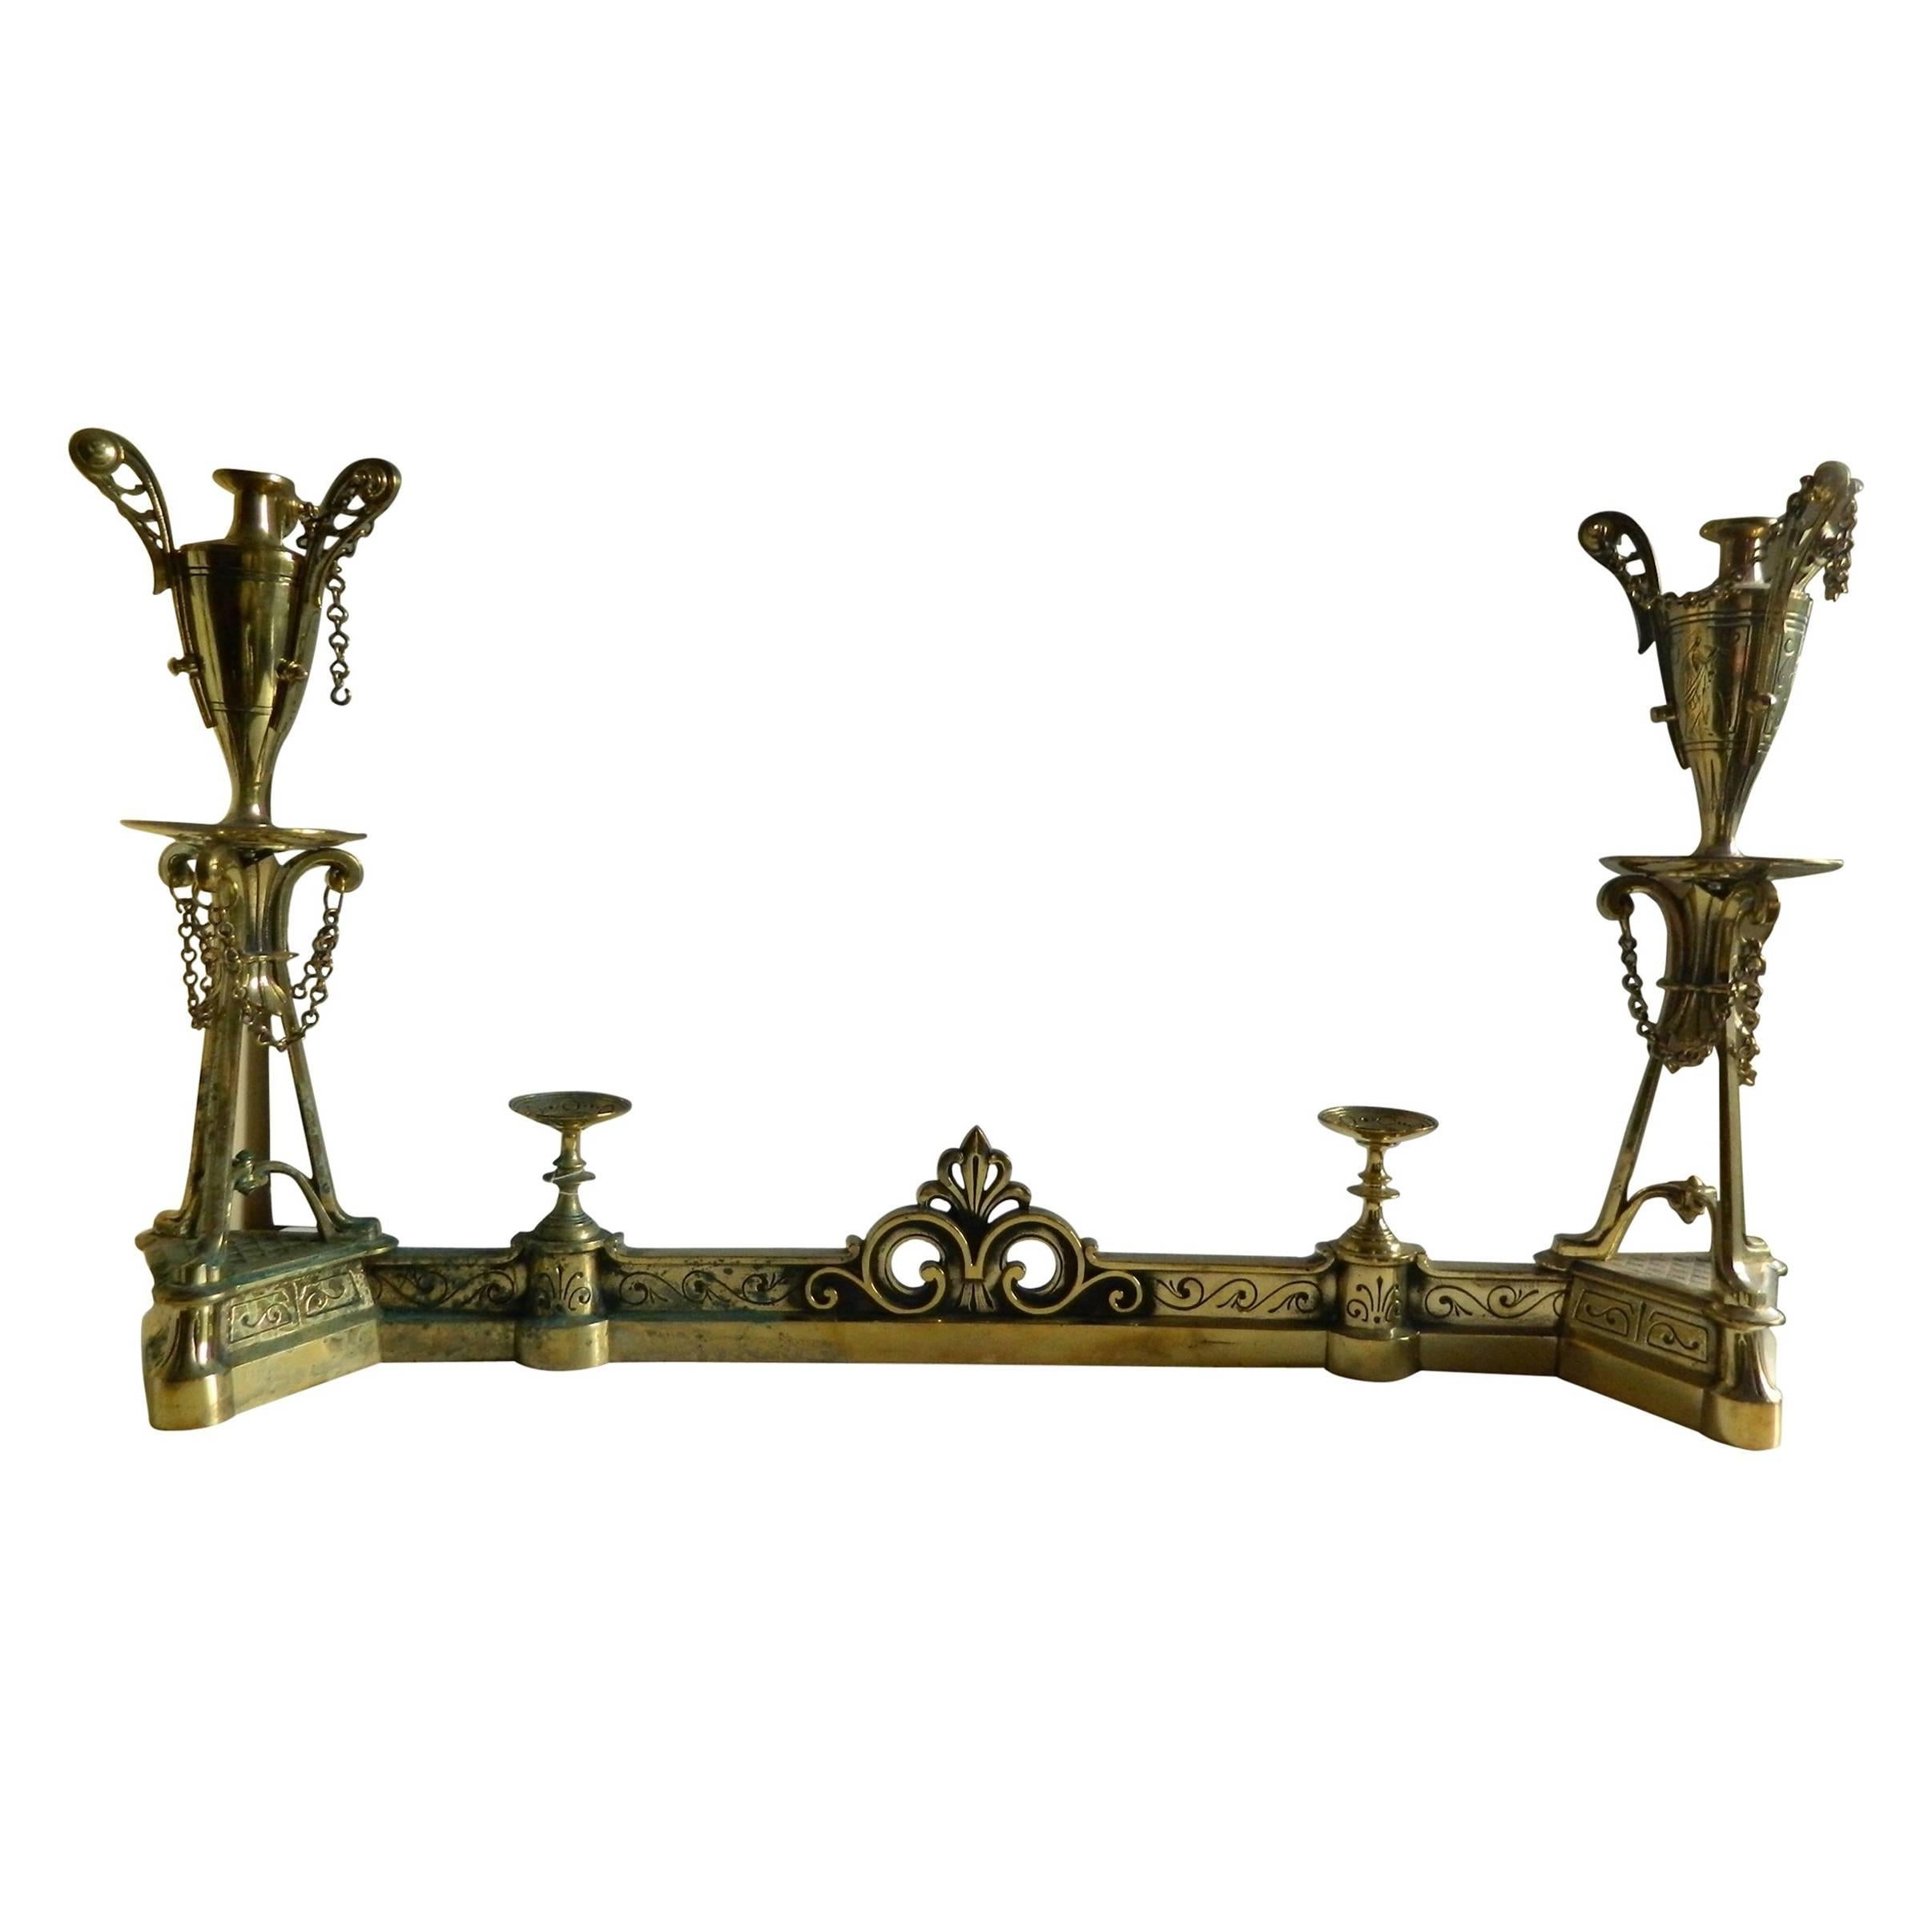 Pair of Polished Brass Chenet or Andirons with a Fender, Urn Motif, 19th Century For Sale